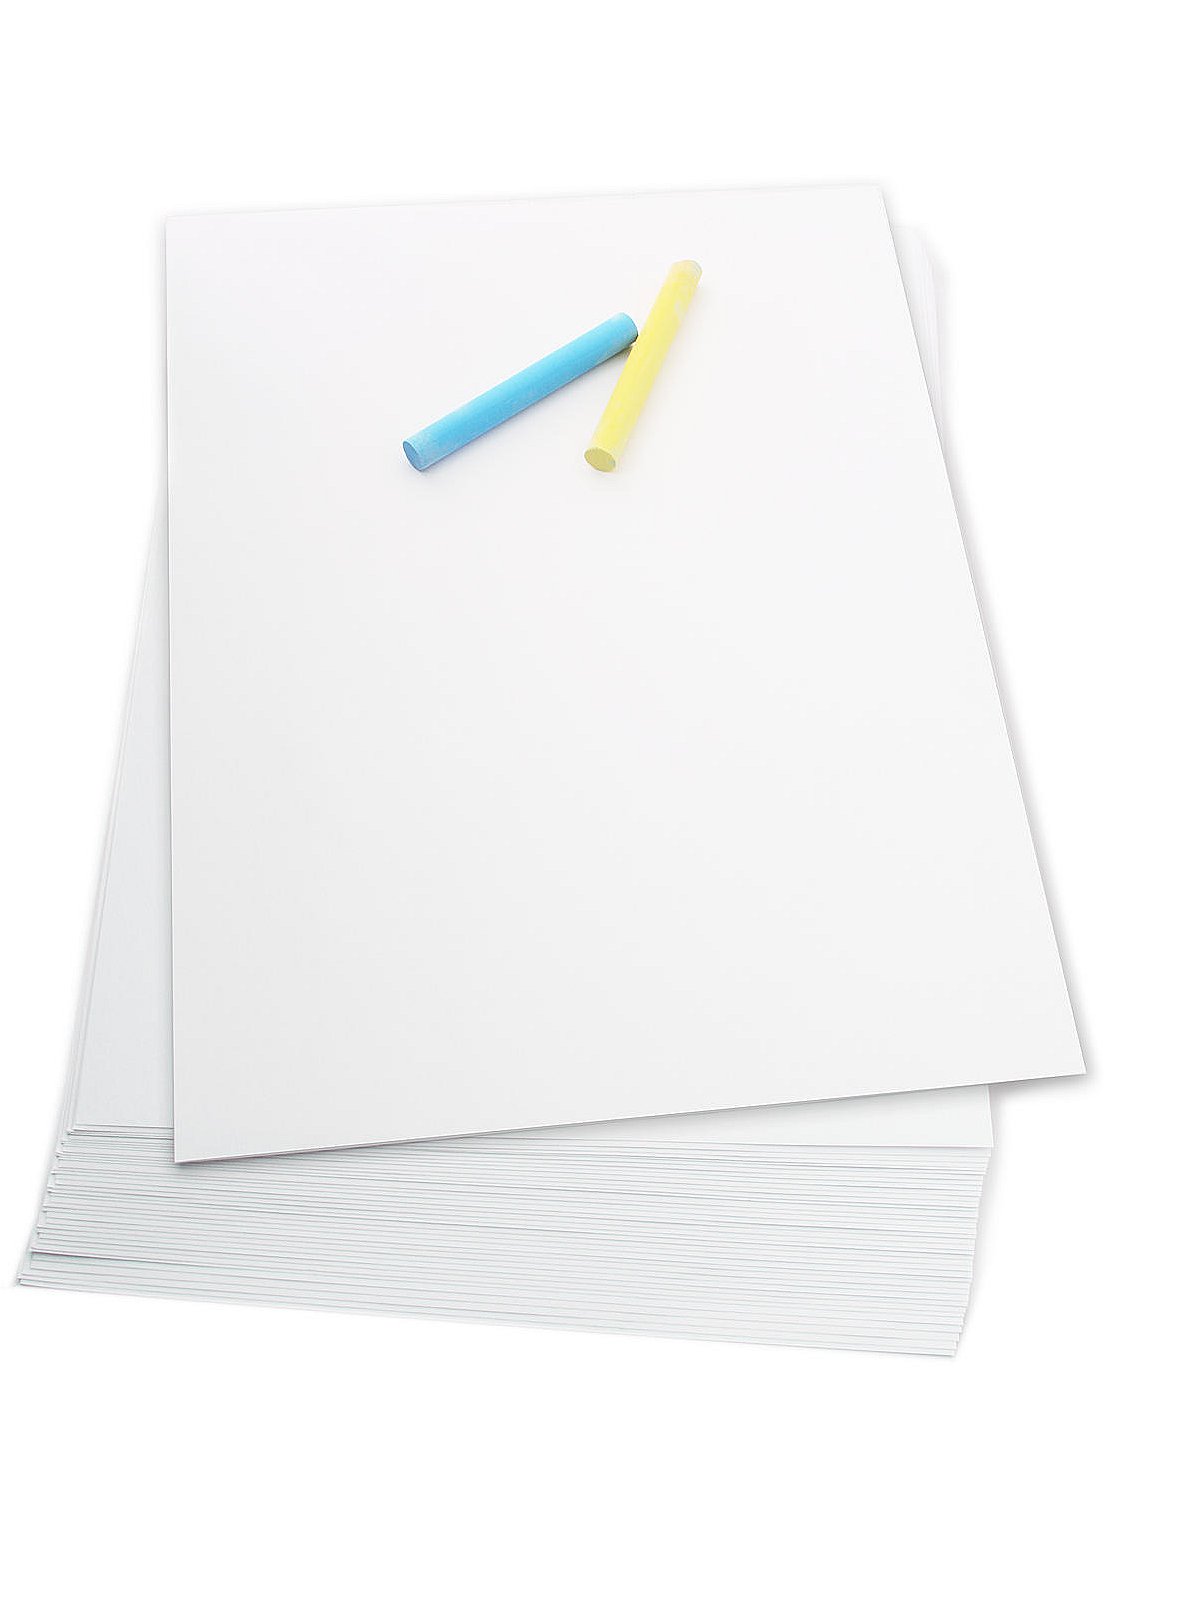 Pacon® Doodle Pads, 9 x 12, 60 Sheets, White, Pack Of 12 Pads